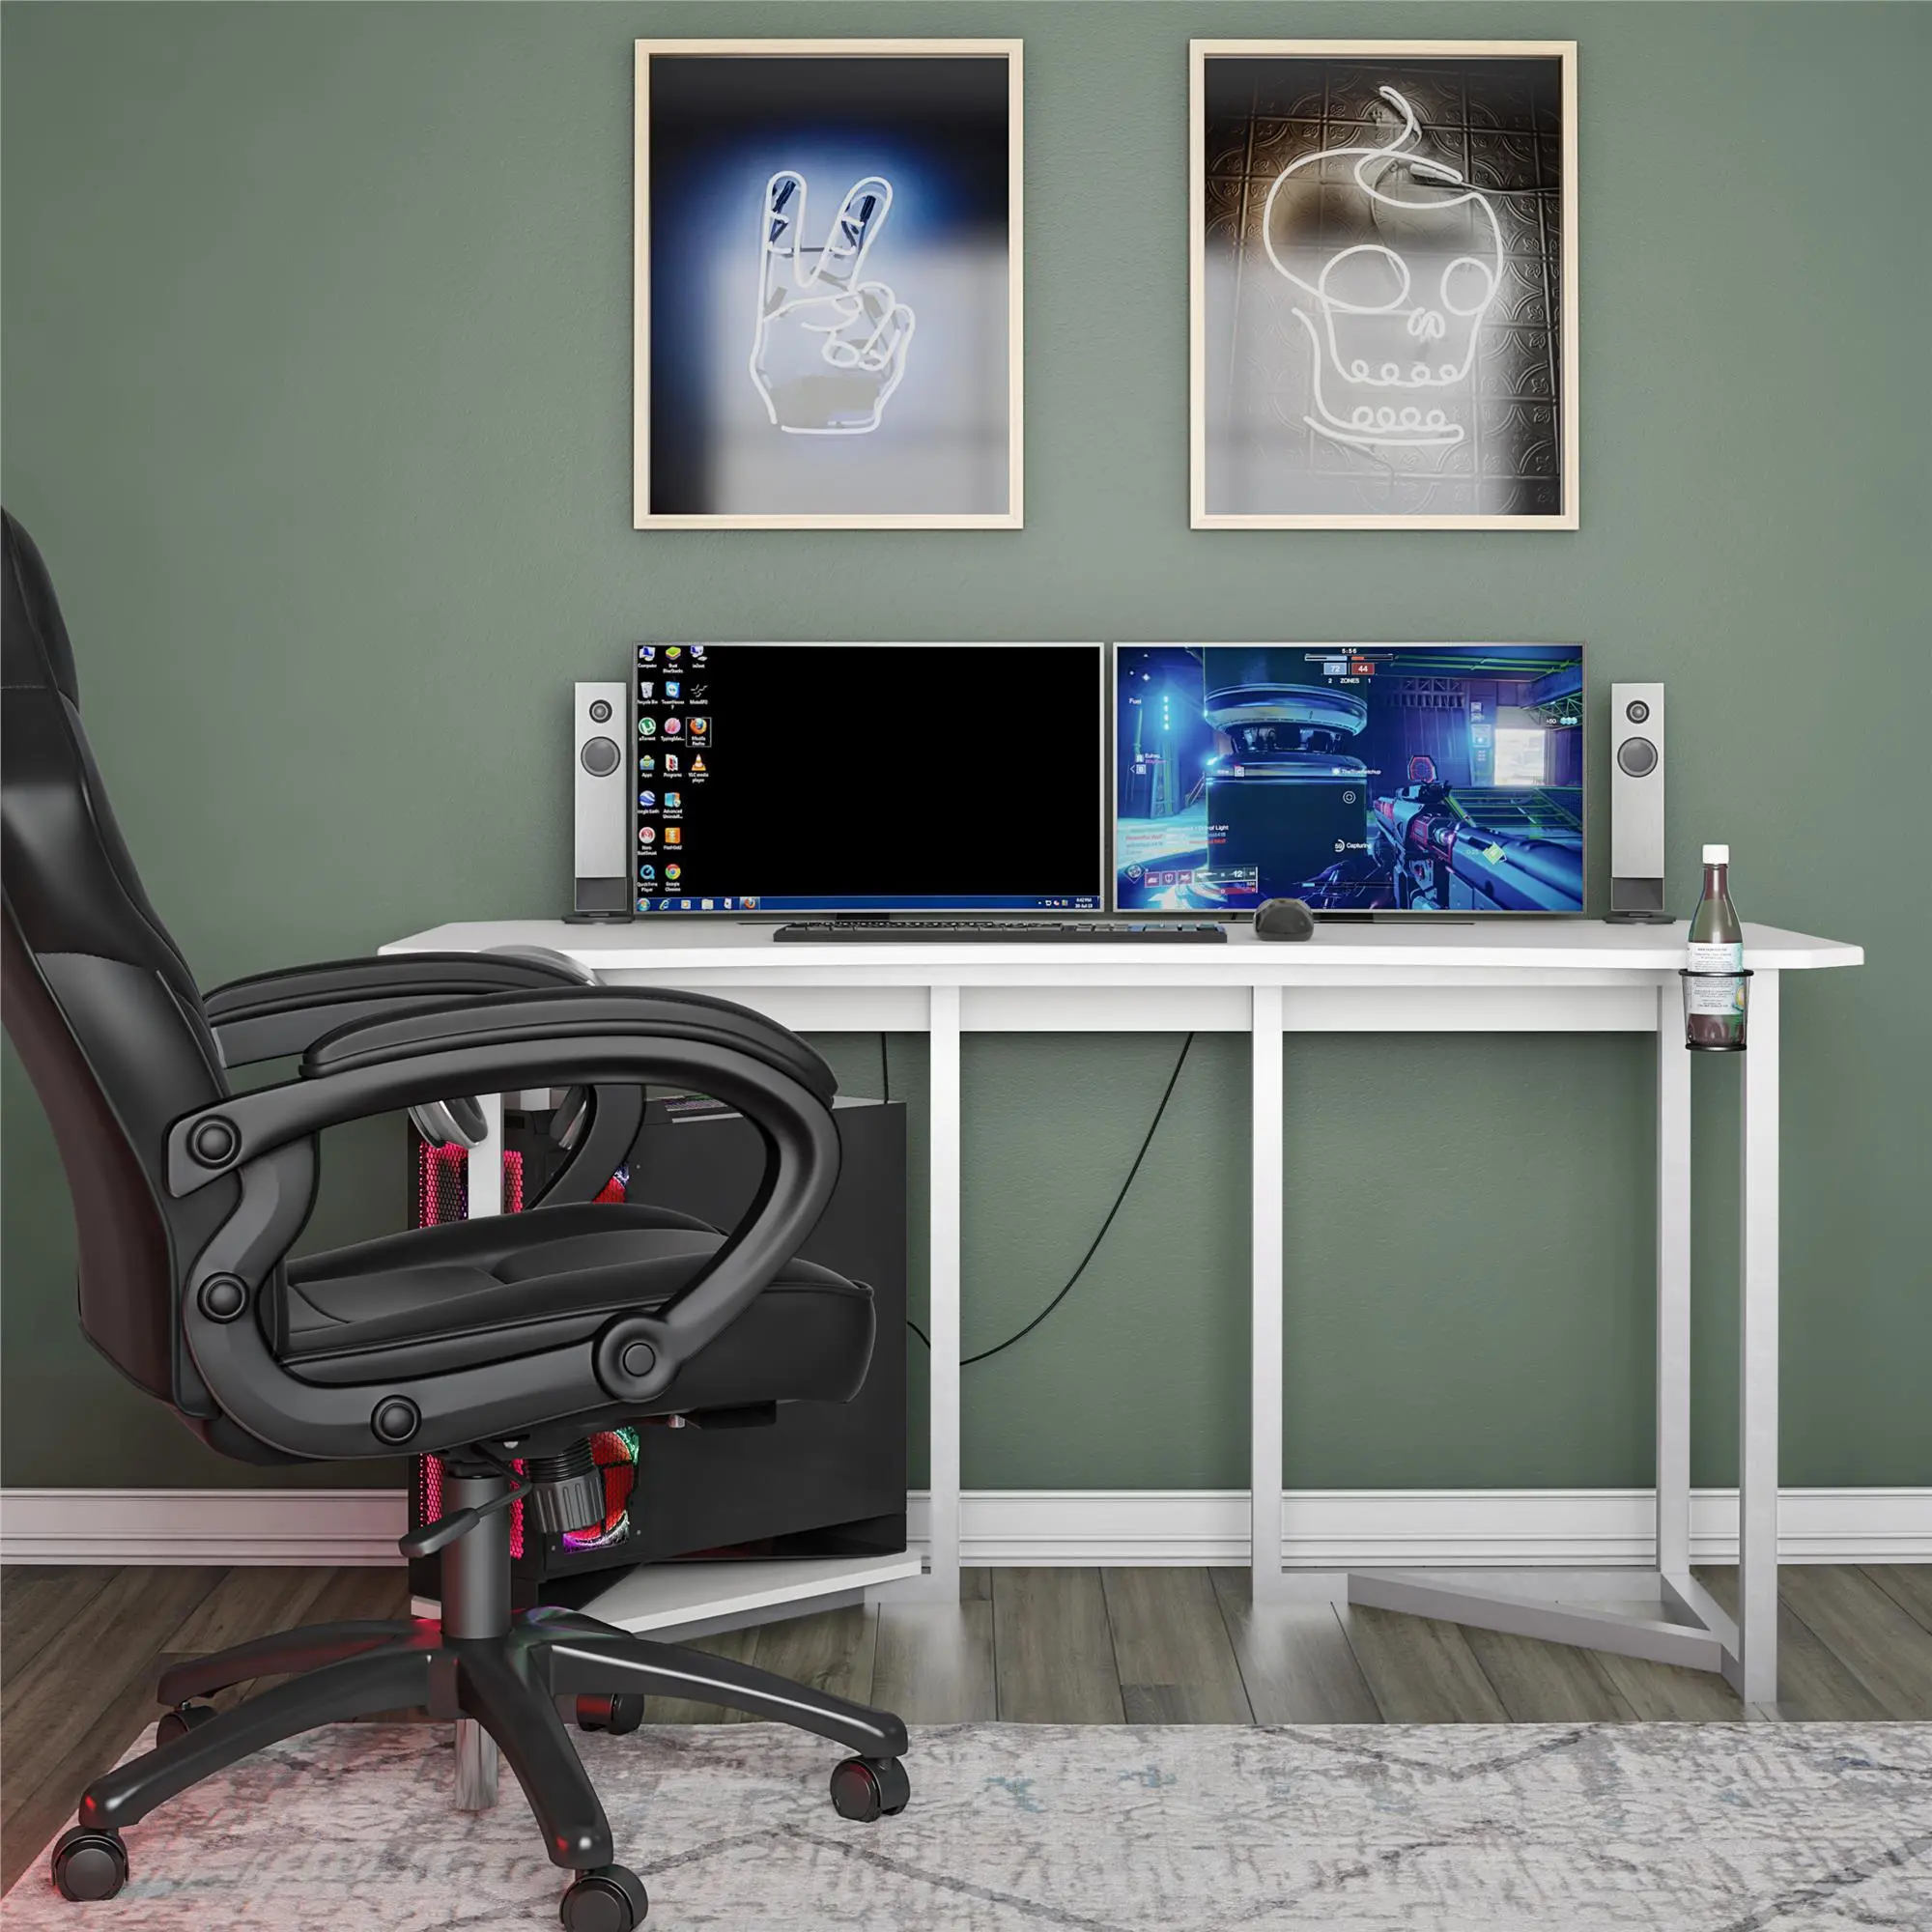 https://static.rcwilley.com/products/112428894/White-Gaming-Desk-with-CPU-Stand---Quest-rcwilley-image1.webp